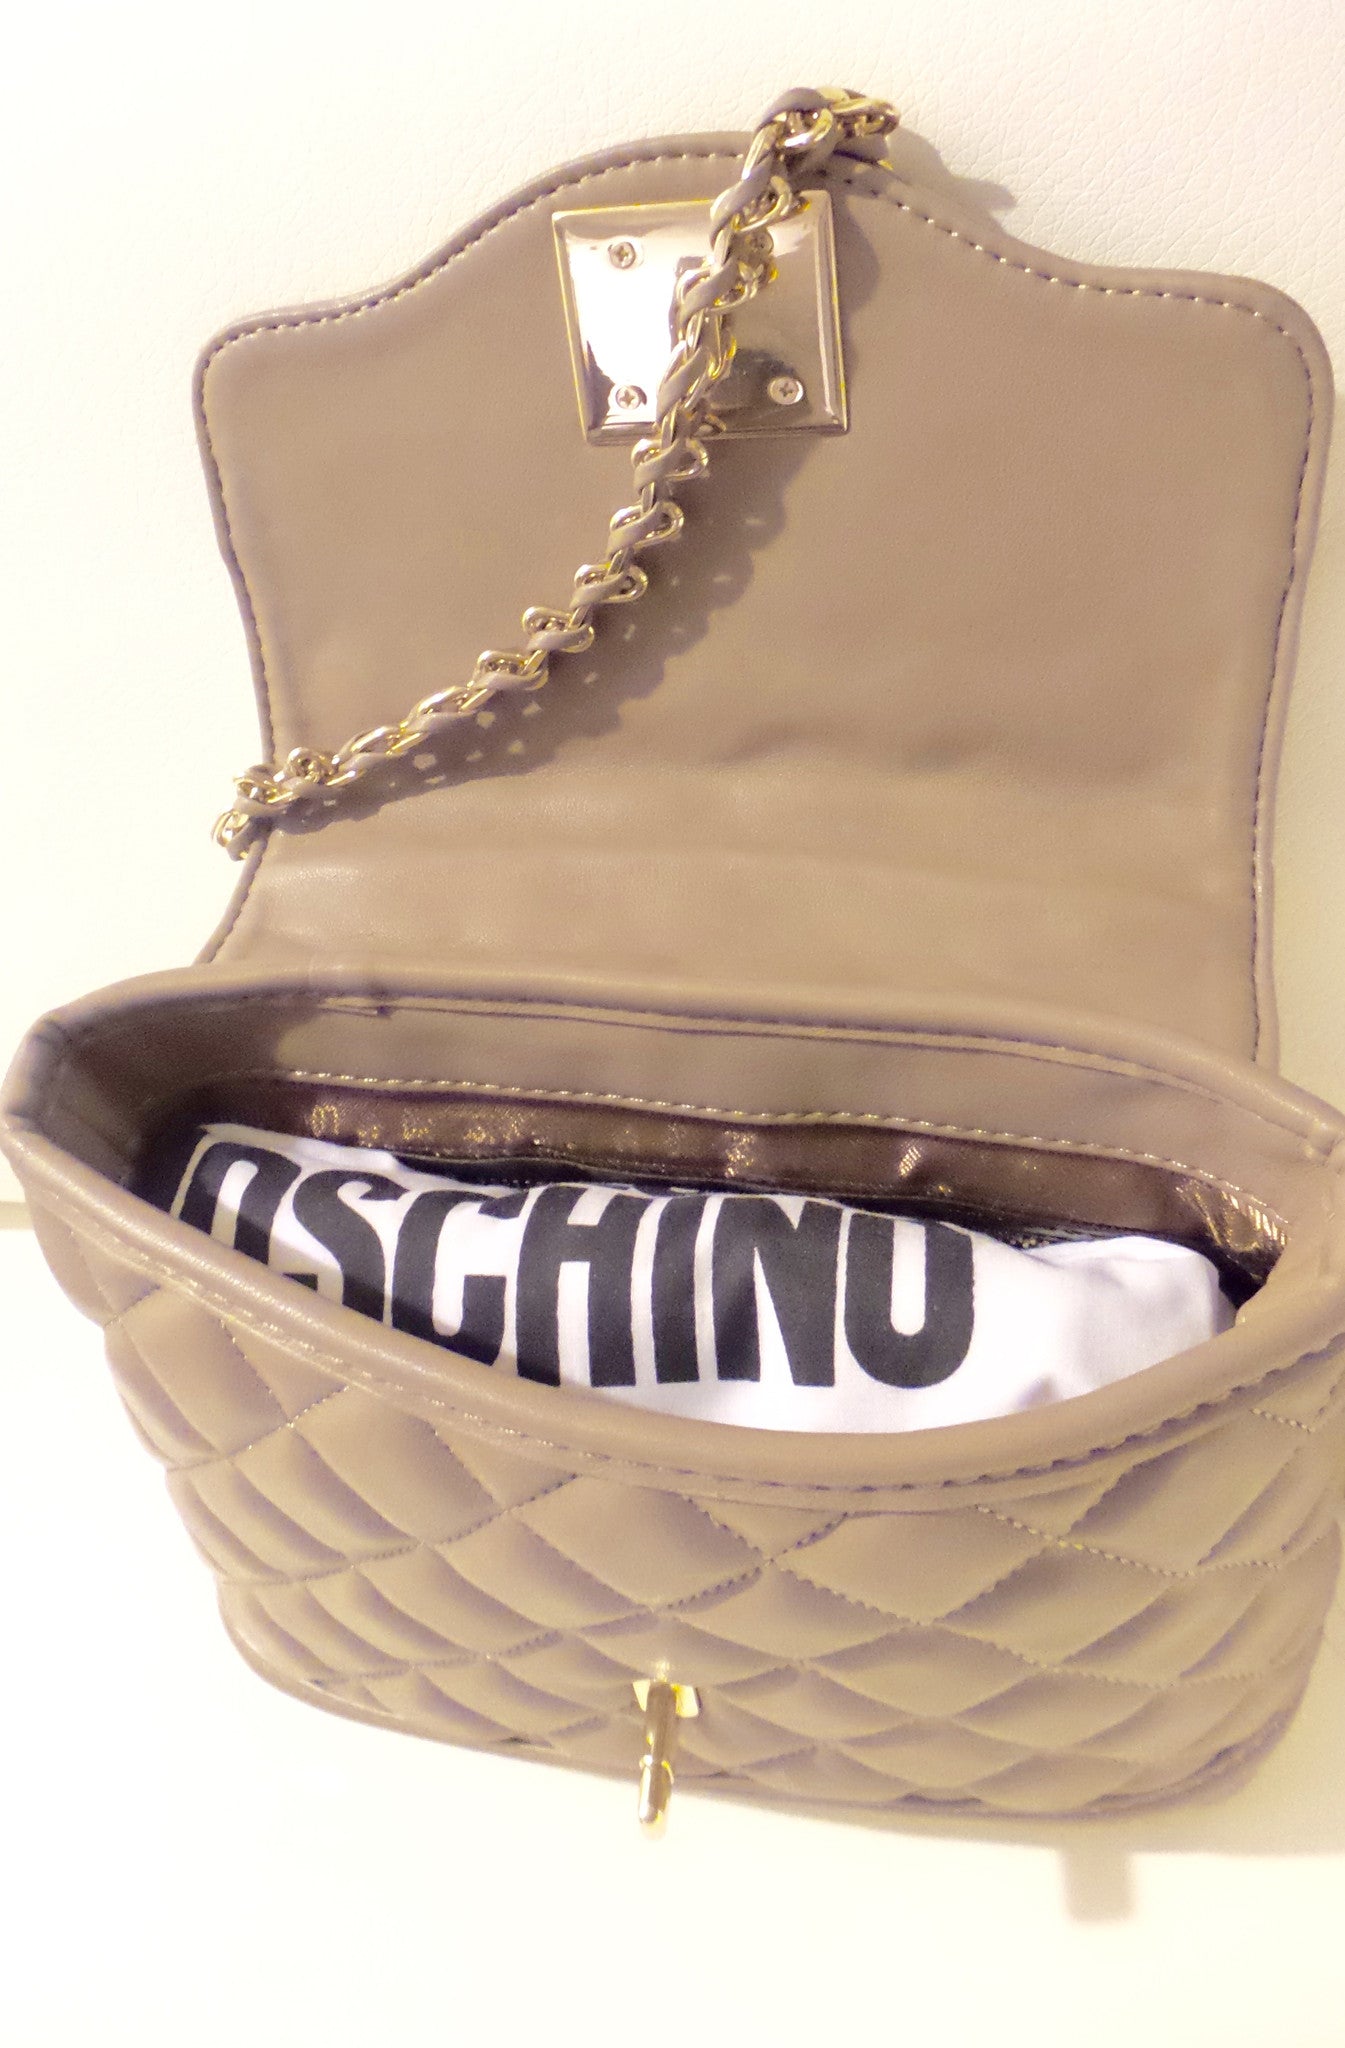 Love Moschino Quilted Mini leather Shoulder Handbag/Accessories